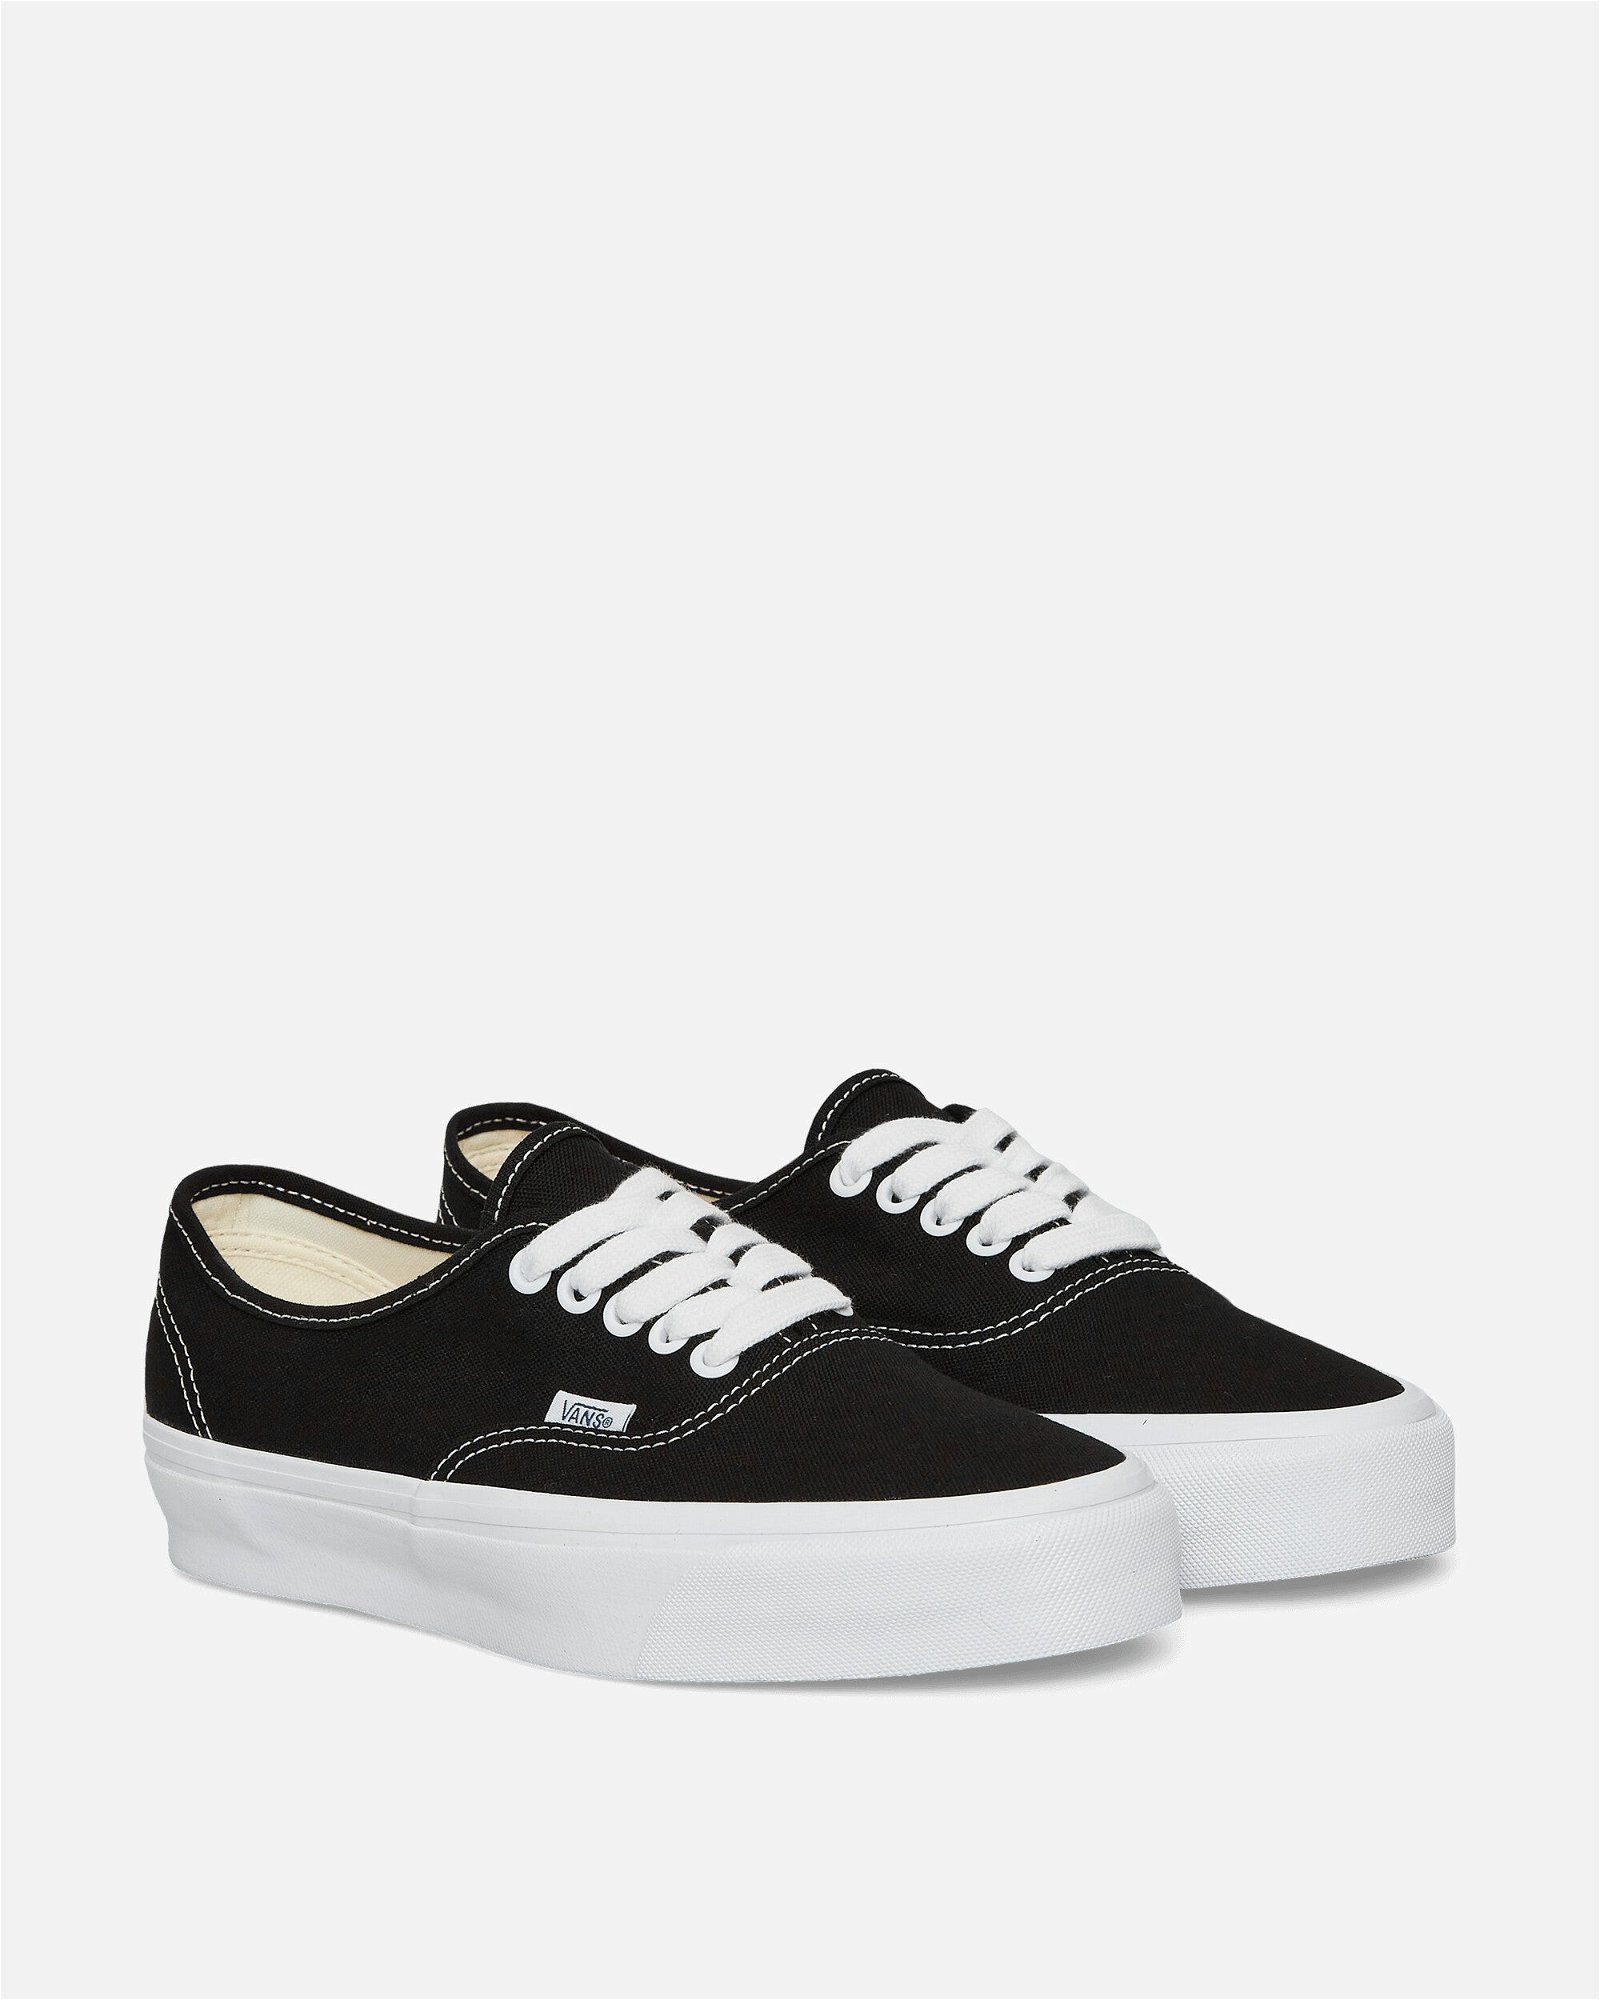 OG Authentic LX Sneakers Black